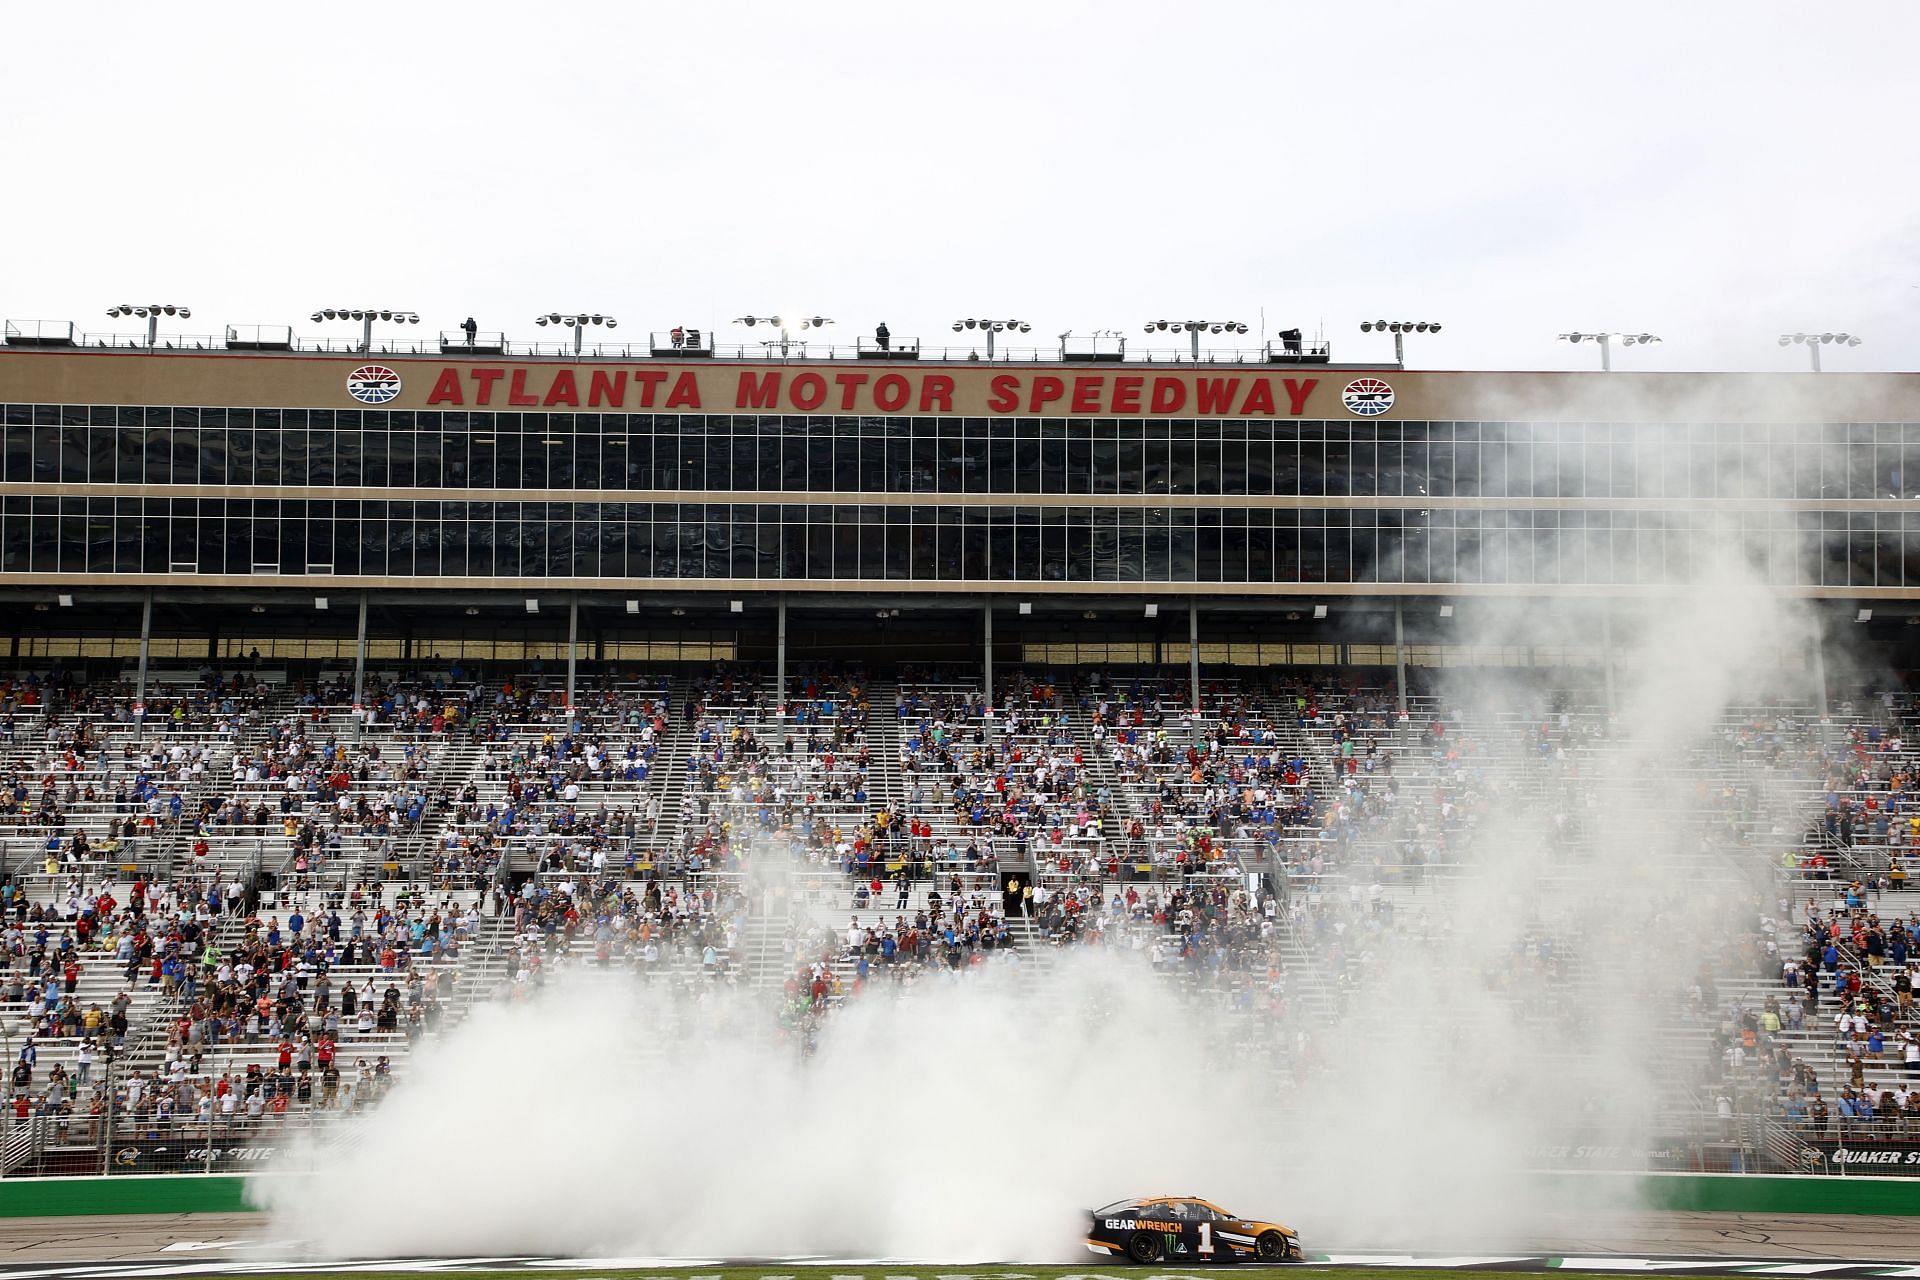 Kurt Busch celebrates with a burnout after winning the NASCAR Cup Series Quaker State 400 presented by Walmart at Atlanta Motor Speedway (Photo by Jared C. Tilton/Getty Images)